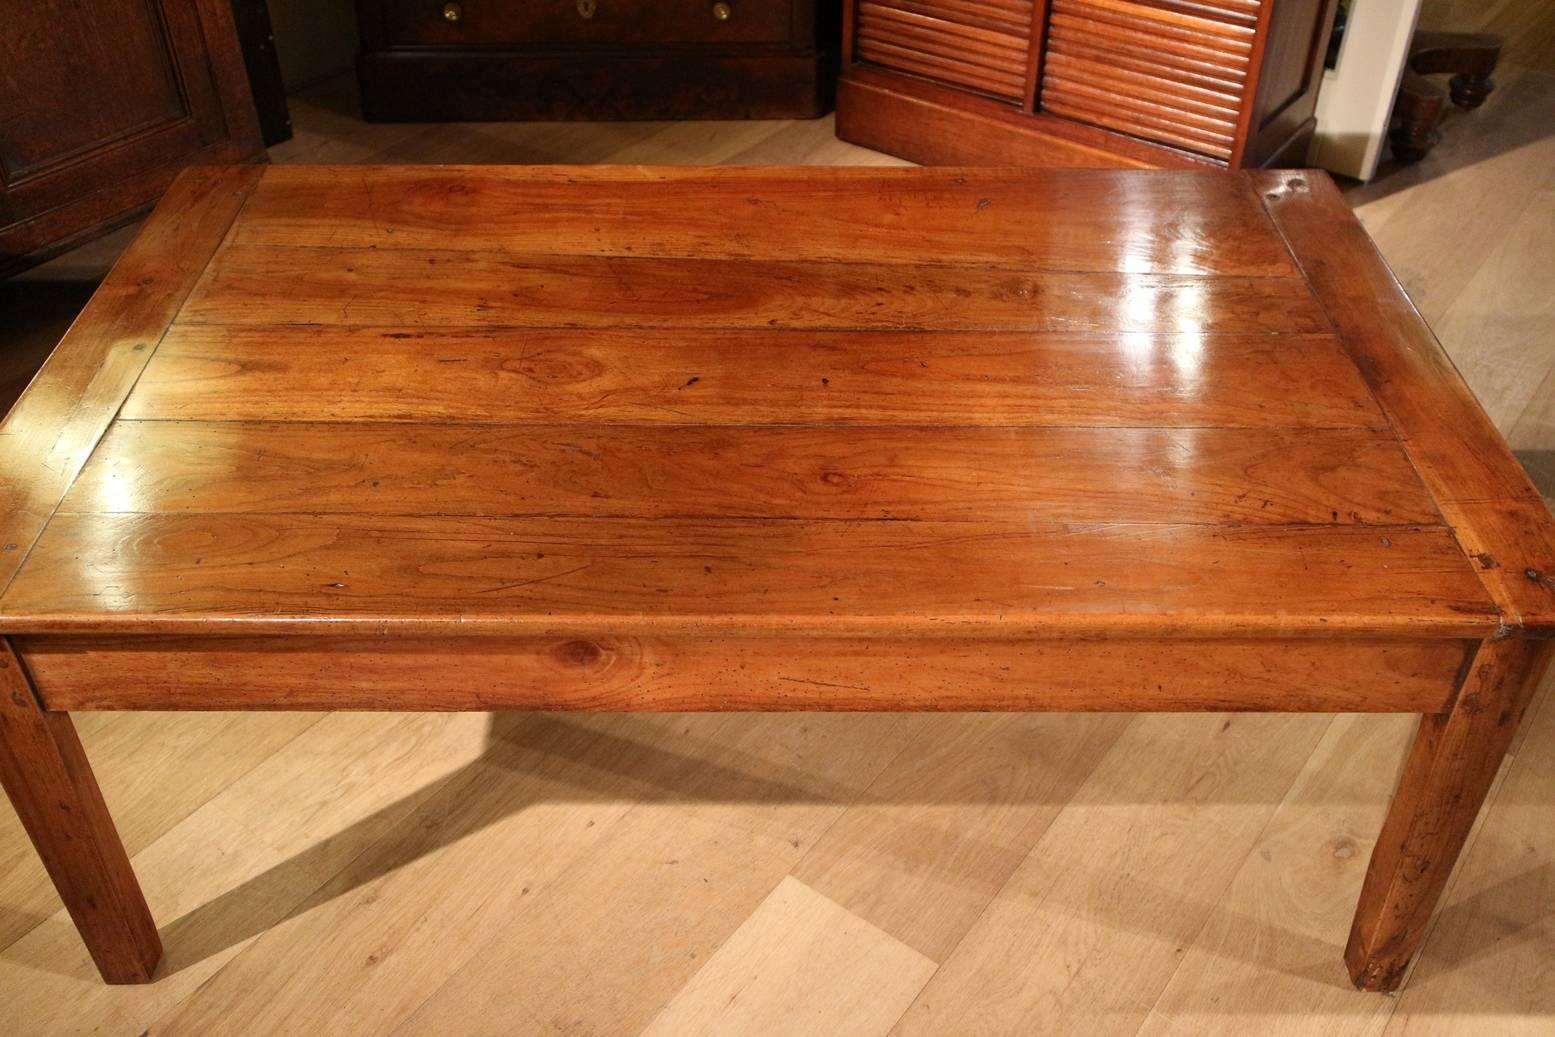 Beautiful weathered cherrywood coffee table with one drawer. Warm color.
Origin: France
Period: 1800-1820
Size: L 132cm, W 78cm, H 52cm.